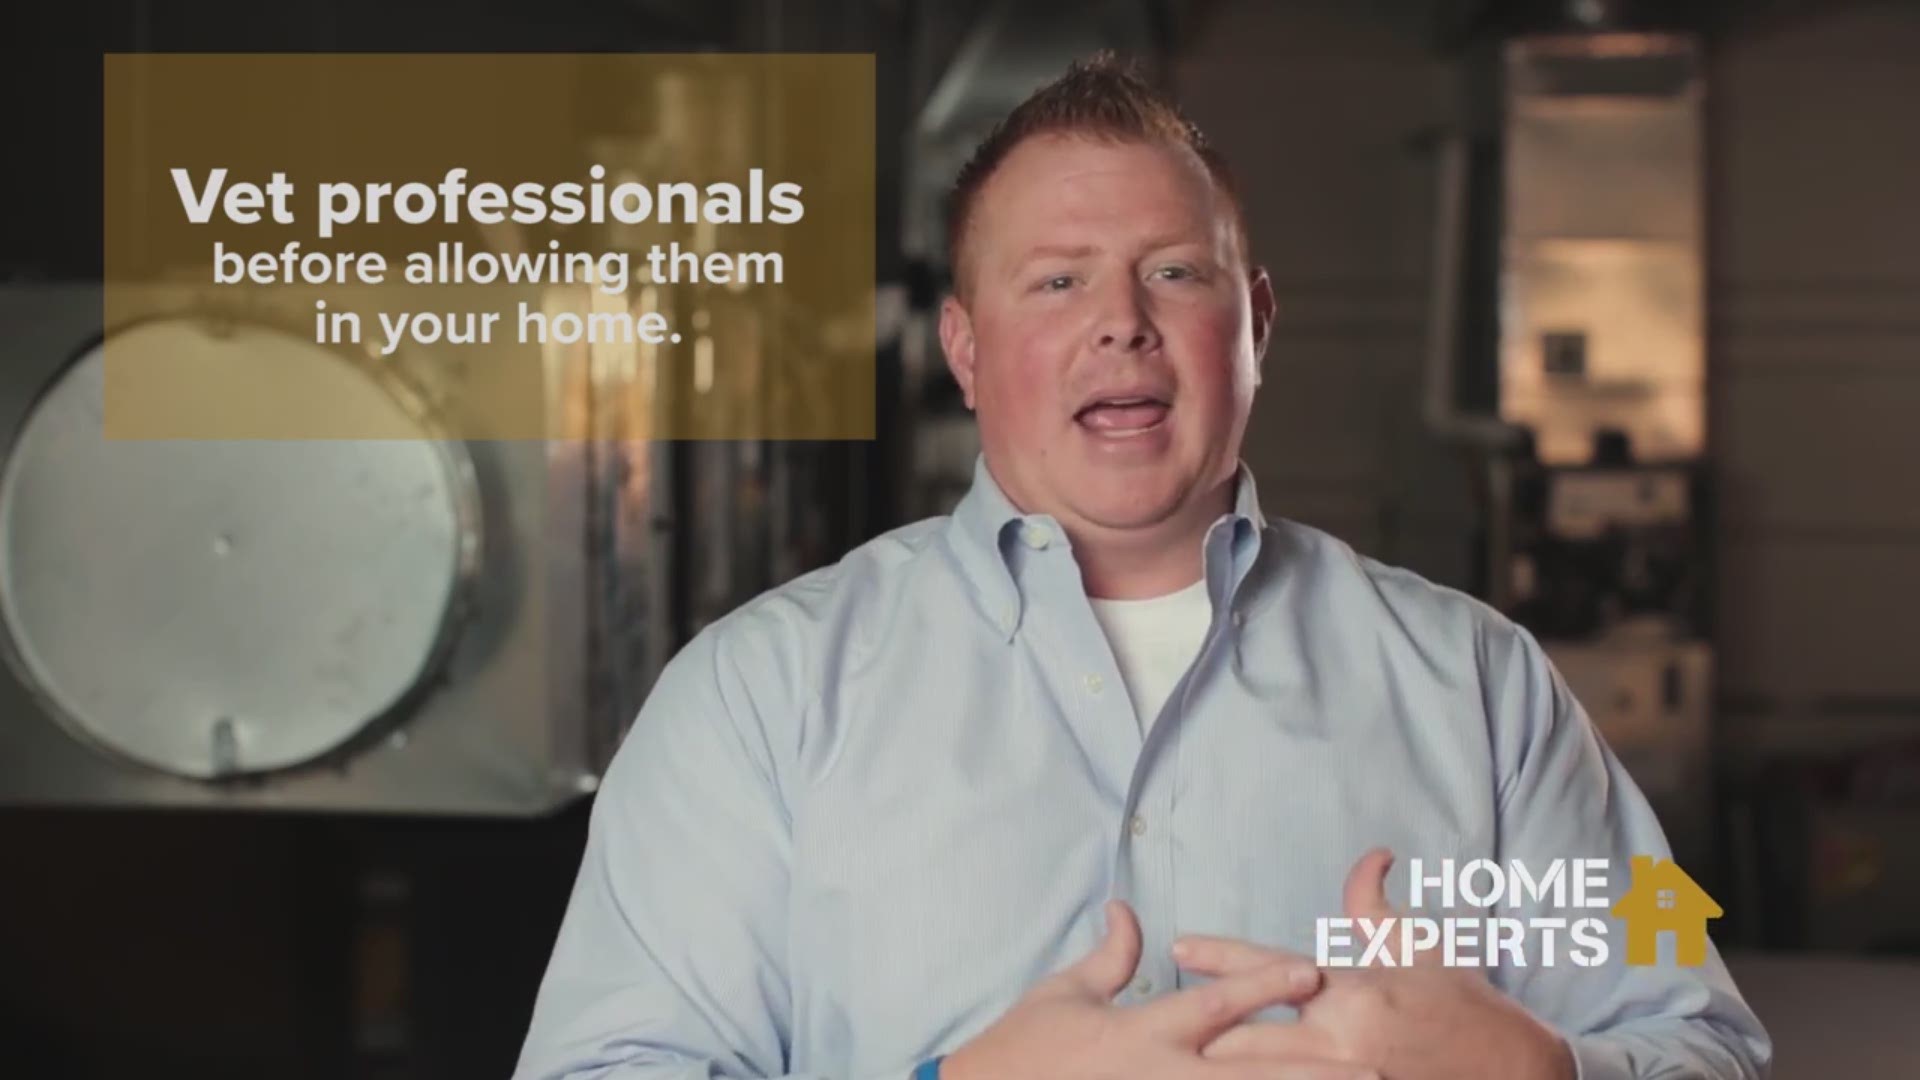 Home Experts is sponsored by Gilmore Heating & Air.